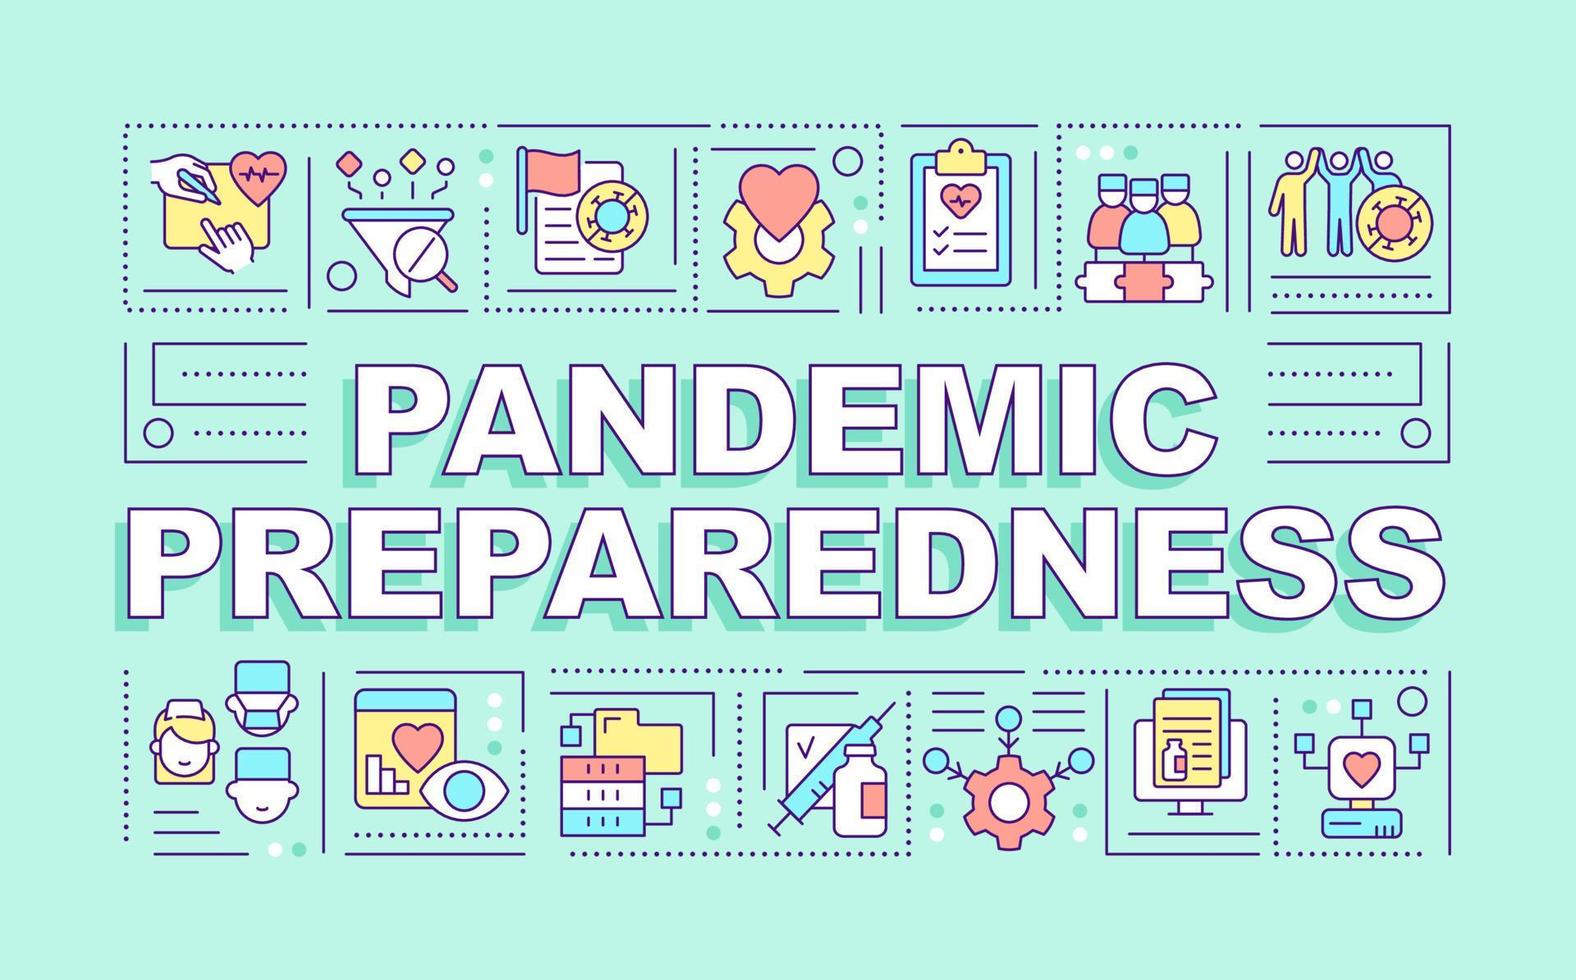 Pandemic preparedness word concepts mint banner. Planning for outbreaks. Infographics with editable icons on color background. Isolated typography. Vector illustration with text.